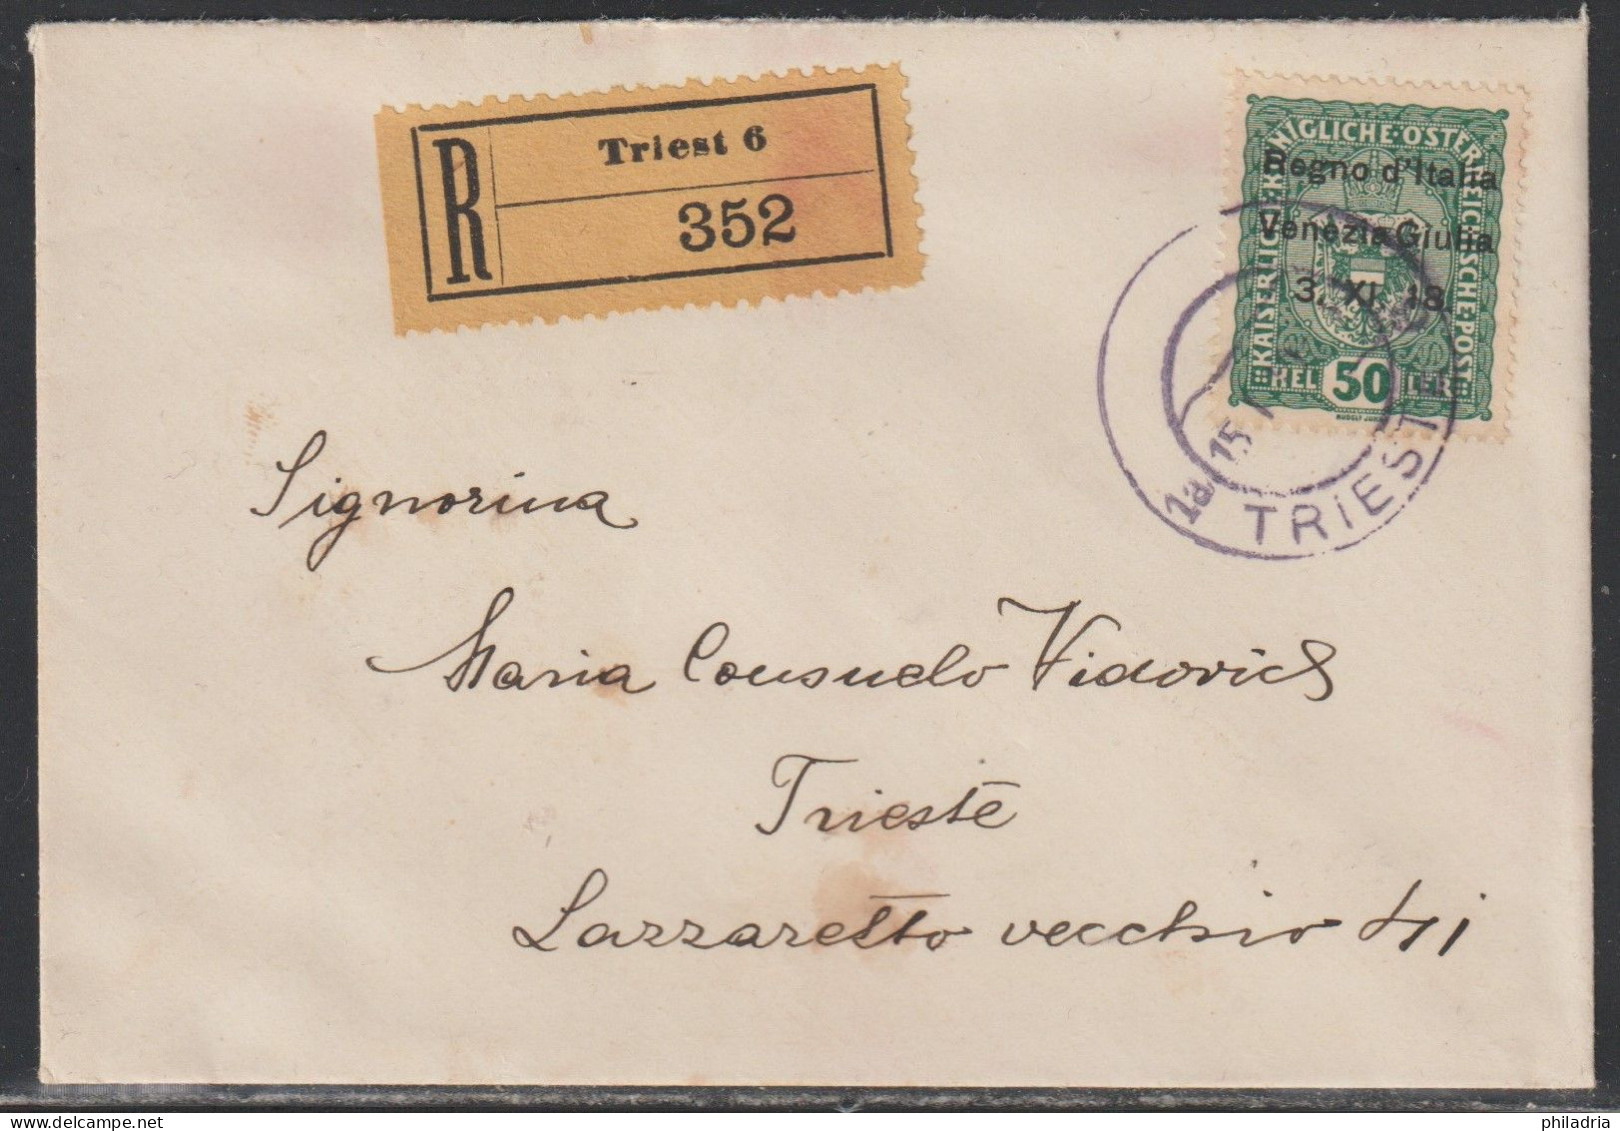 Triest 6, 1919, Registered Cover Franked With 50 Cent. - Venezia Giuliana